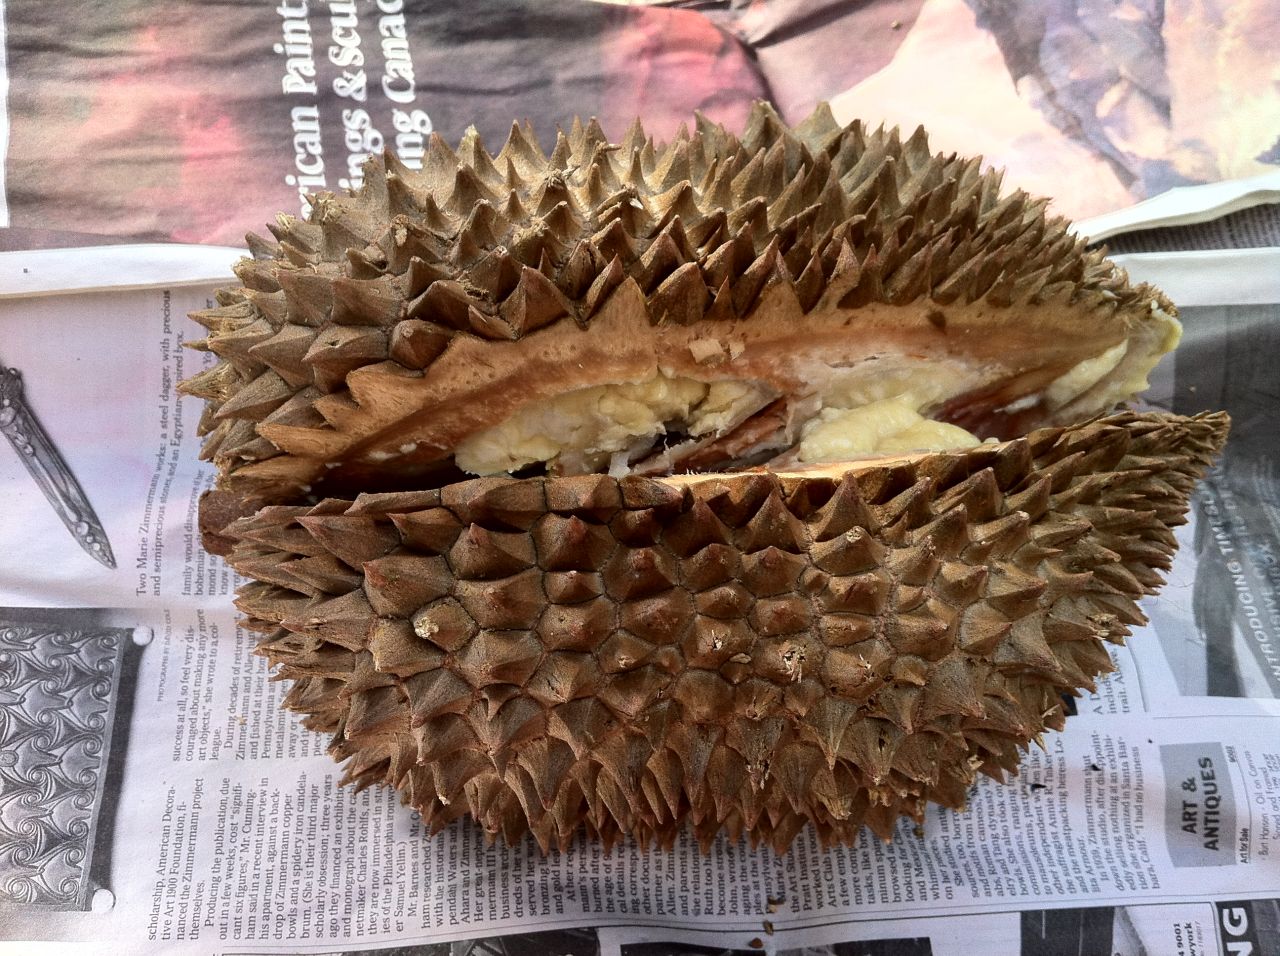 Durian: Like eating strawberries and cream in a public toilet.